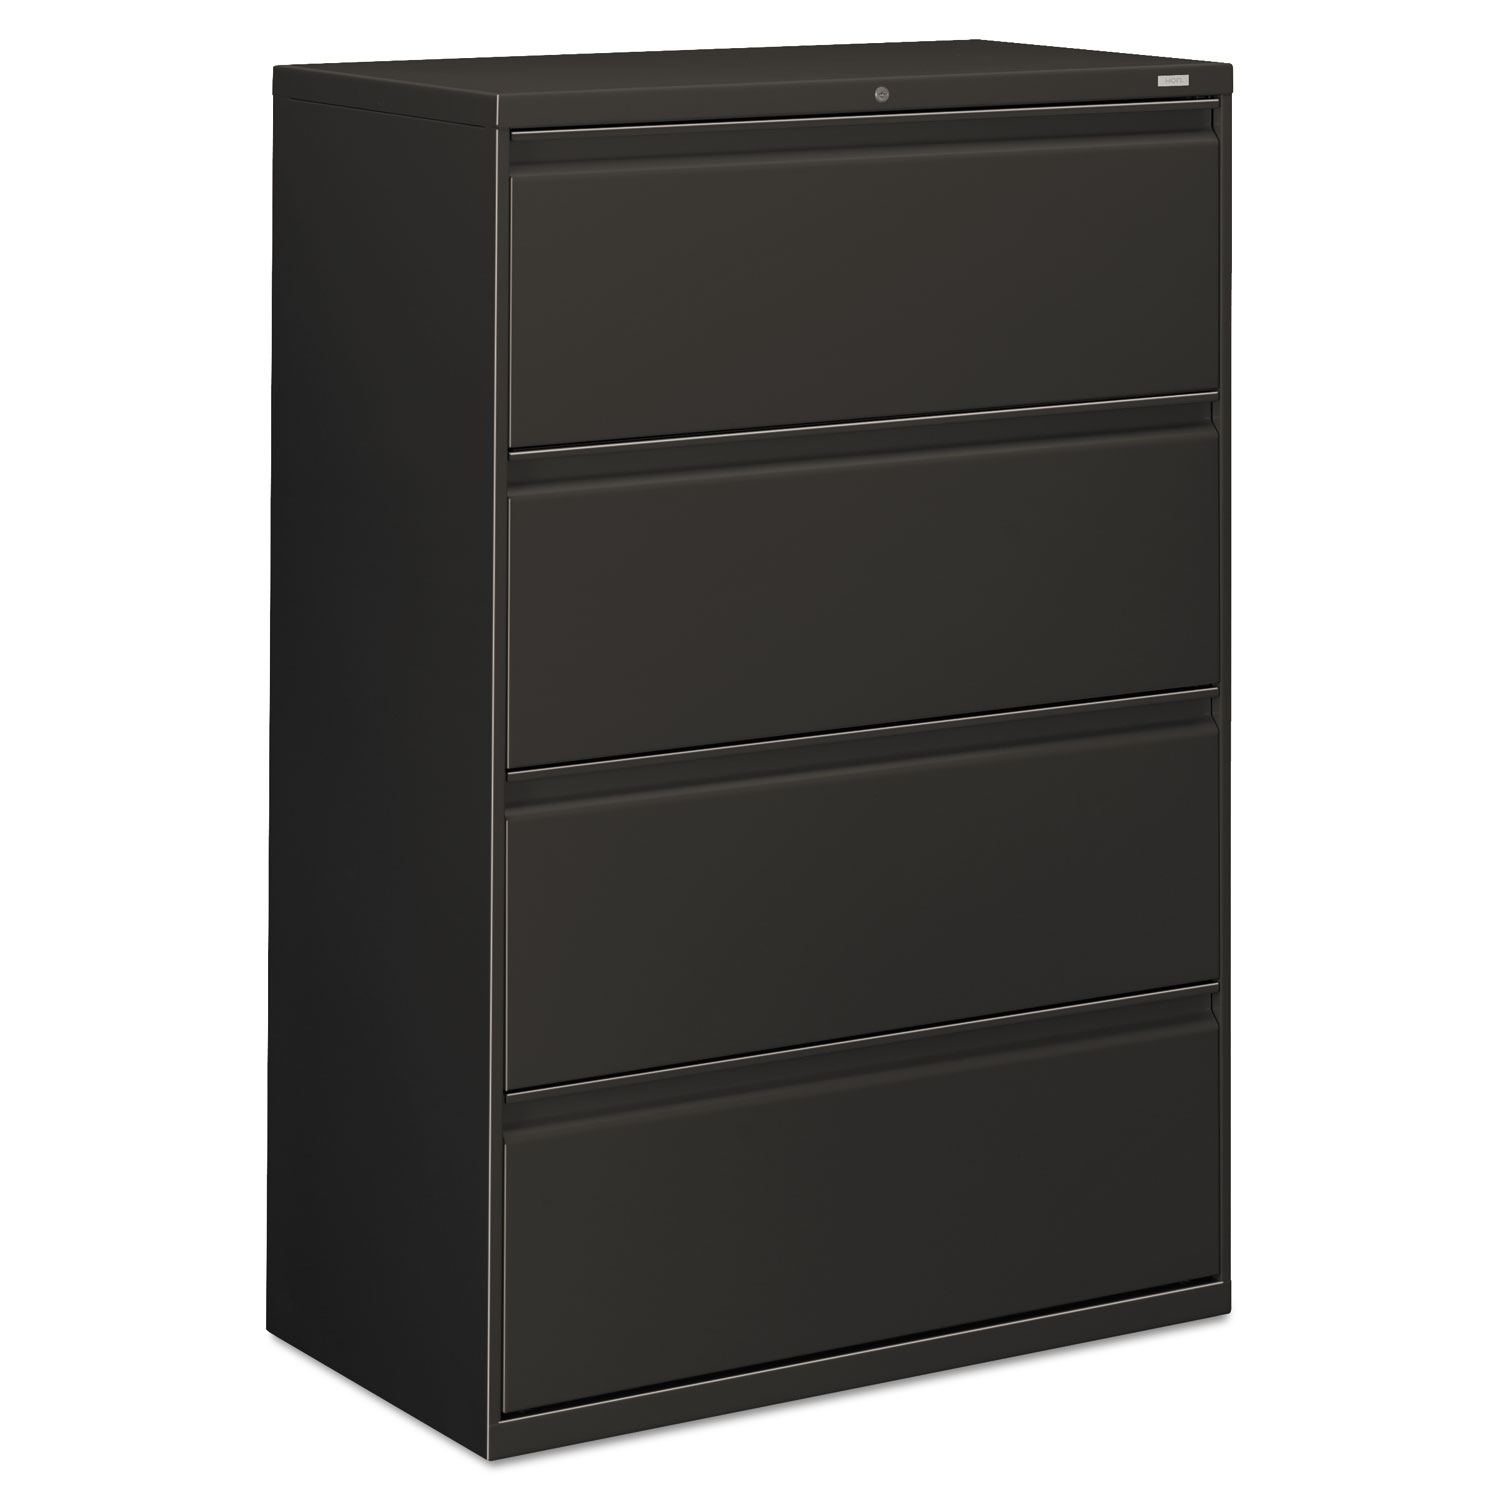 800 Series Four-Drawer Lateral File, 36w x 19-1/4d x 53-1/4h, Charcoal